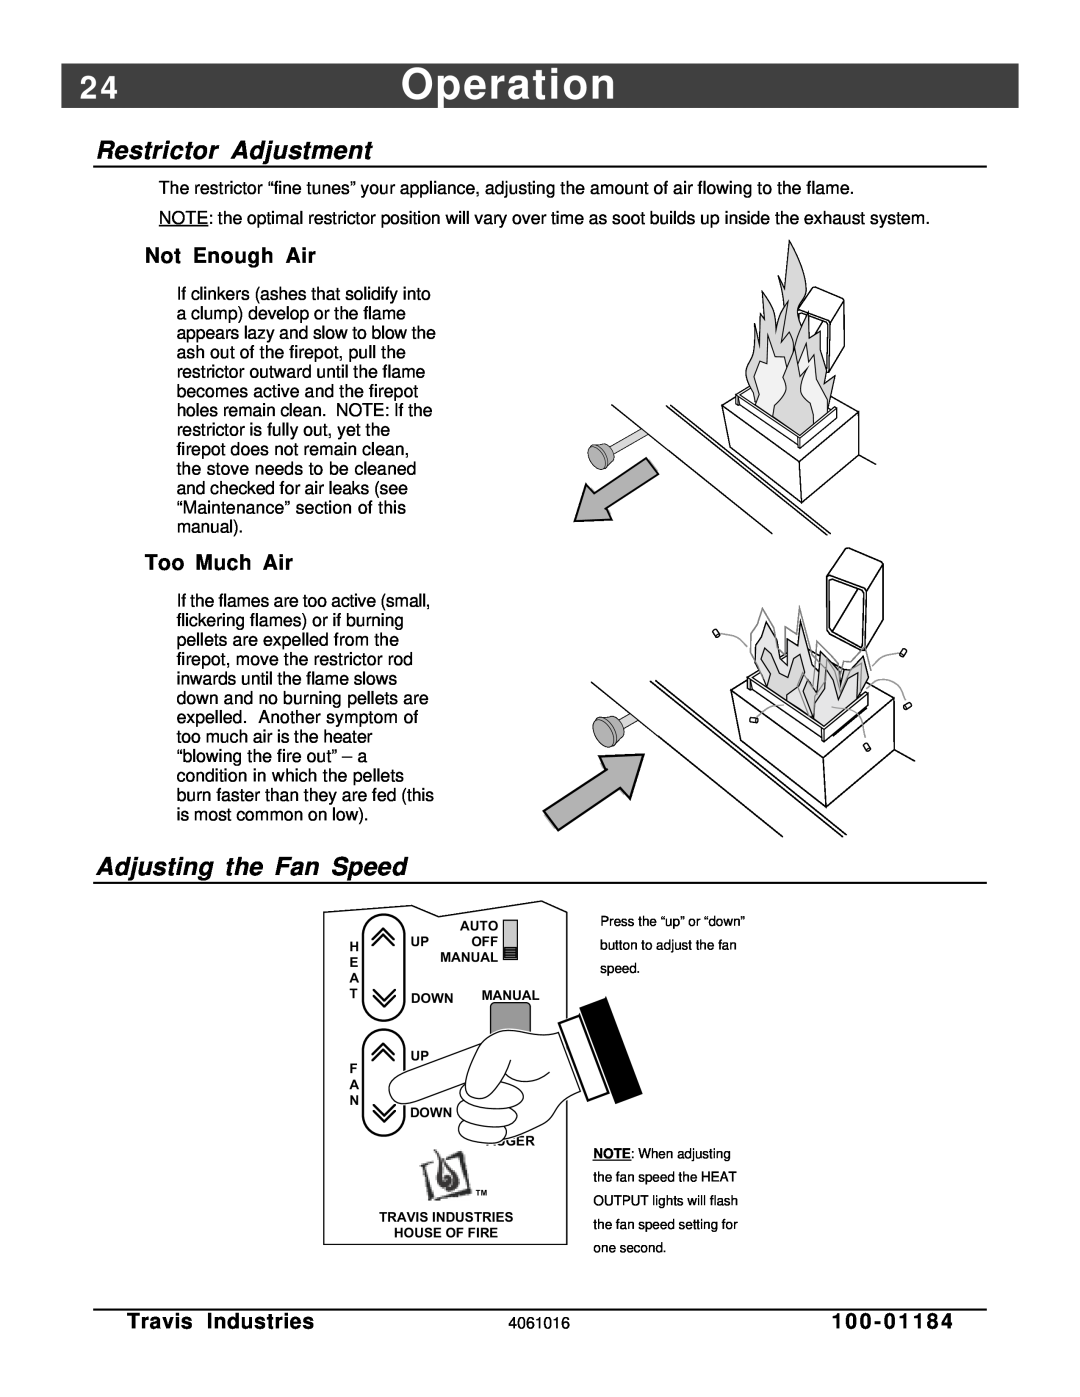 Lopi Leyden Pellet Stove manual 2 4Operation, Adjusting the Fan Speed, Restrictor Adjustment, Not Enough Air, Too Much Air 